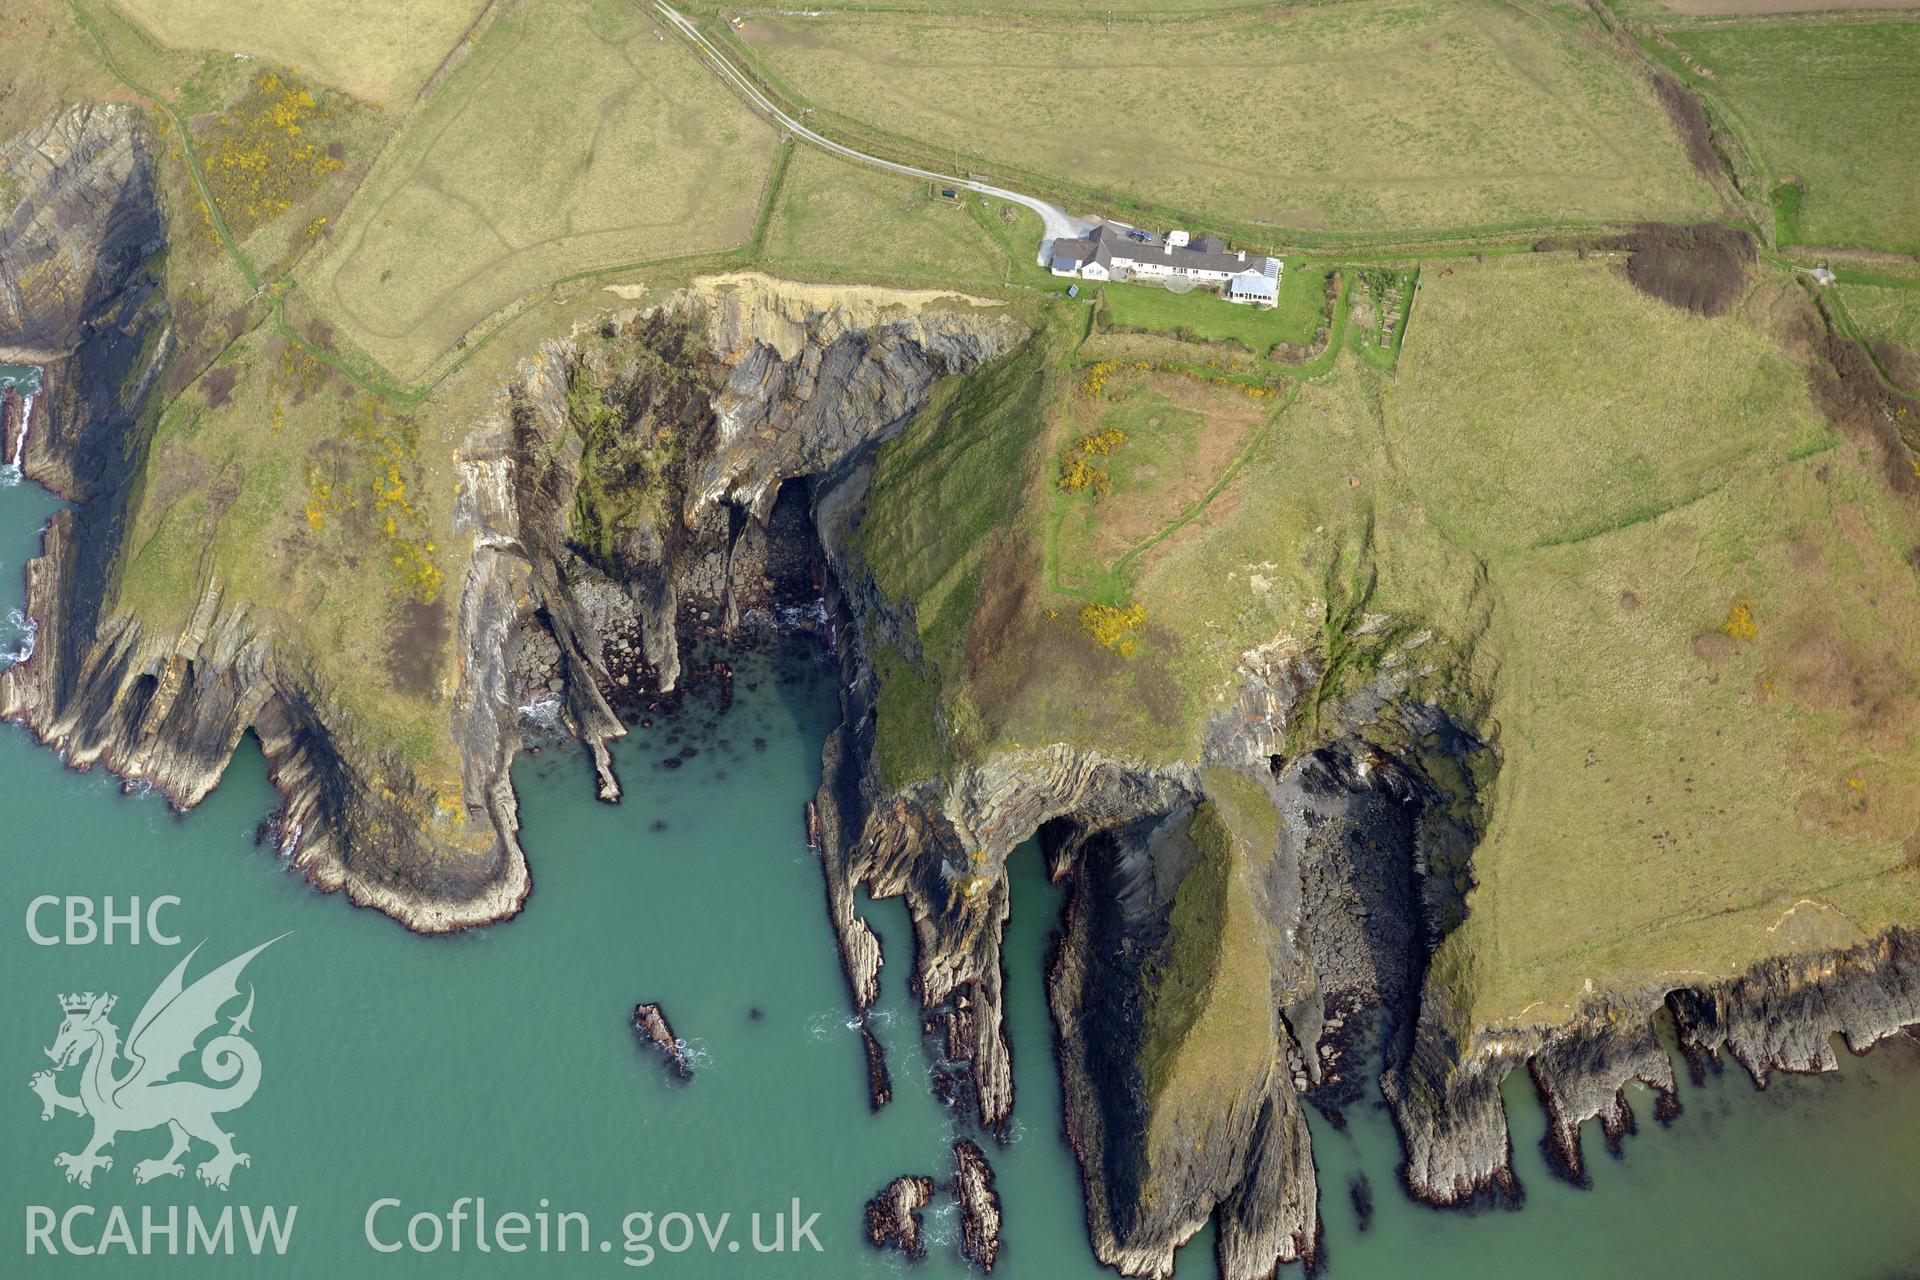 Aerial photography of Pen Castell promontory fort taken on 27th March 2017. Baseline aerial reconnaissance survey for the CHERISH Project. ? Crown: CHERISH PROJECT 2019. Produced with EU funds through the Ireland Wales Co-operation Programme 2014-2020. All material made freely available through the Open Government Licence.